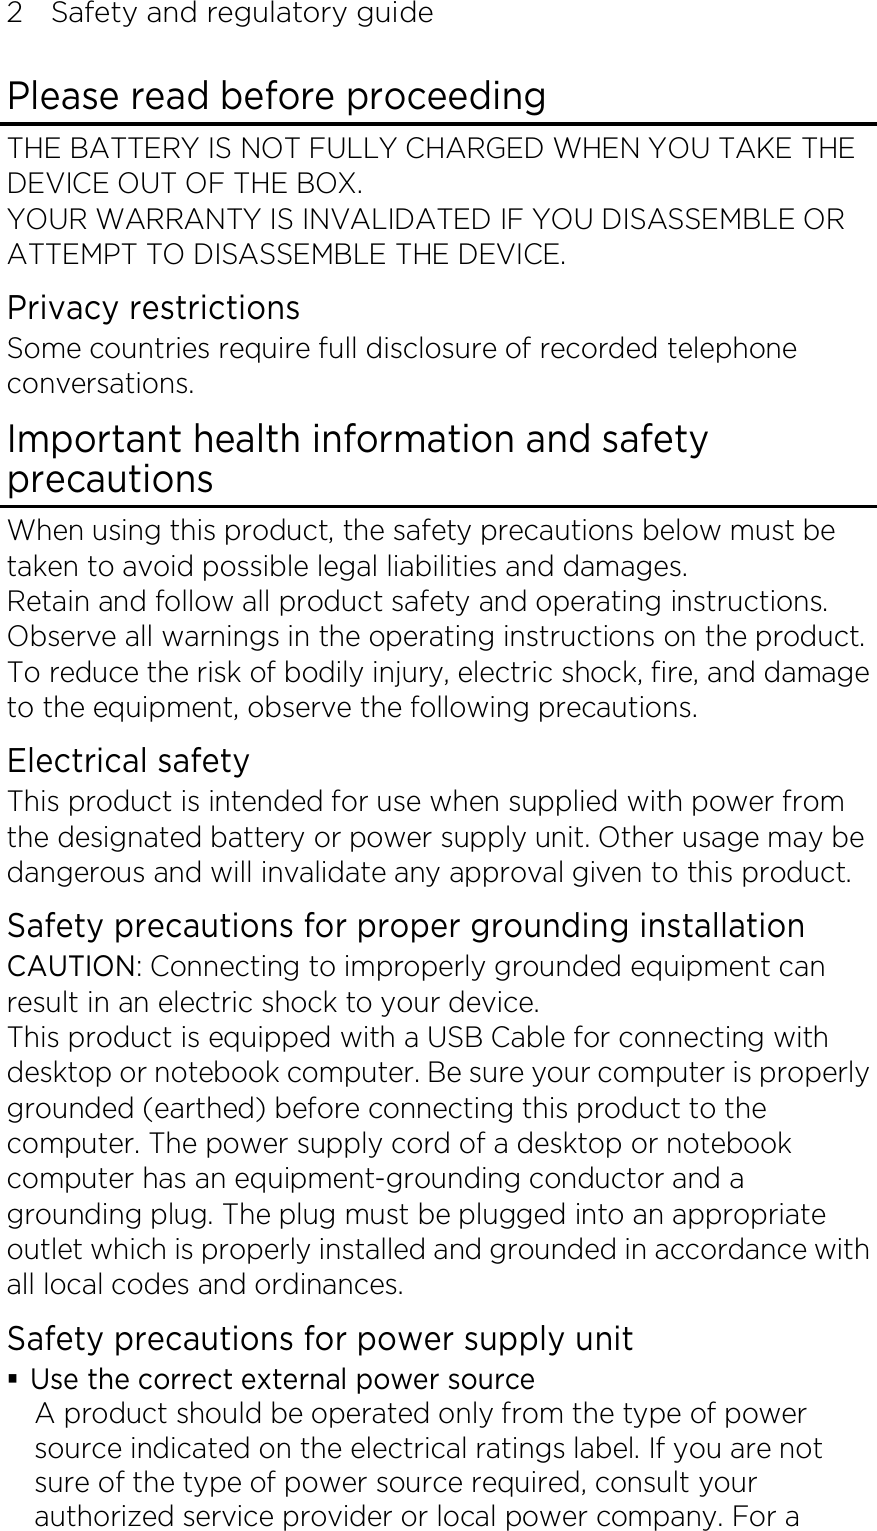 2    Safety and regulatory guide Please read before proceeding THE BATTERY IS NOT FULLY CHARGED WHEN YOU TAKE THE DEVICE OUT OF THE BOX. YOUR WARRANTY IS INVALIDATED IF YOU DISASSEMBLE OR ATTEMPT TO DISASSEMBLE THE DEVICE. Privacy restrictions Some countries require full disclosure of recorded telephone conversations. Important health information and safety precautions When using this product, the safety precautions below must be taken to avoid possible legal liabilities and damages. Retain and follow all product safety and operating instructions. Observe all warnings in the operating instructions on the product. To reduce the risk of bodily injury, electric shock, fire, and damage to the equipment, observe the following precautions. Electrical safety This product is intended for use when supplied with power from the designated battery or power supply unit. Other usage may be dangerous and will invalidate any approval given to this product. Safety precautions for proper grounding installation CAUTION: Connecting to improperly grounded equipment can result in an electric shock to your device. This product is equipped with a USB Cable for connecting with desktop or notebook computer. Be sure your computer is properly grounded (earthed) before connecting this product to the computer. The power supply cord of a desktop or notebook computer has an equipment-grounding conductor and a grounding plug. The plug must be plugged into an appropriate outlet which is properly installed and grounded in accordance with all local codes and ordinances. Safety precautions for power supply unit  Use the correct external power source A product should be operated only from the type of power source indicated on the electrical ratings label. If you are not sure of the type of power source required, consult your authorized service provider or local power company. For a 